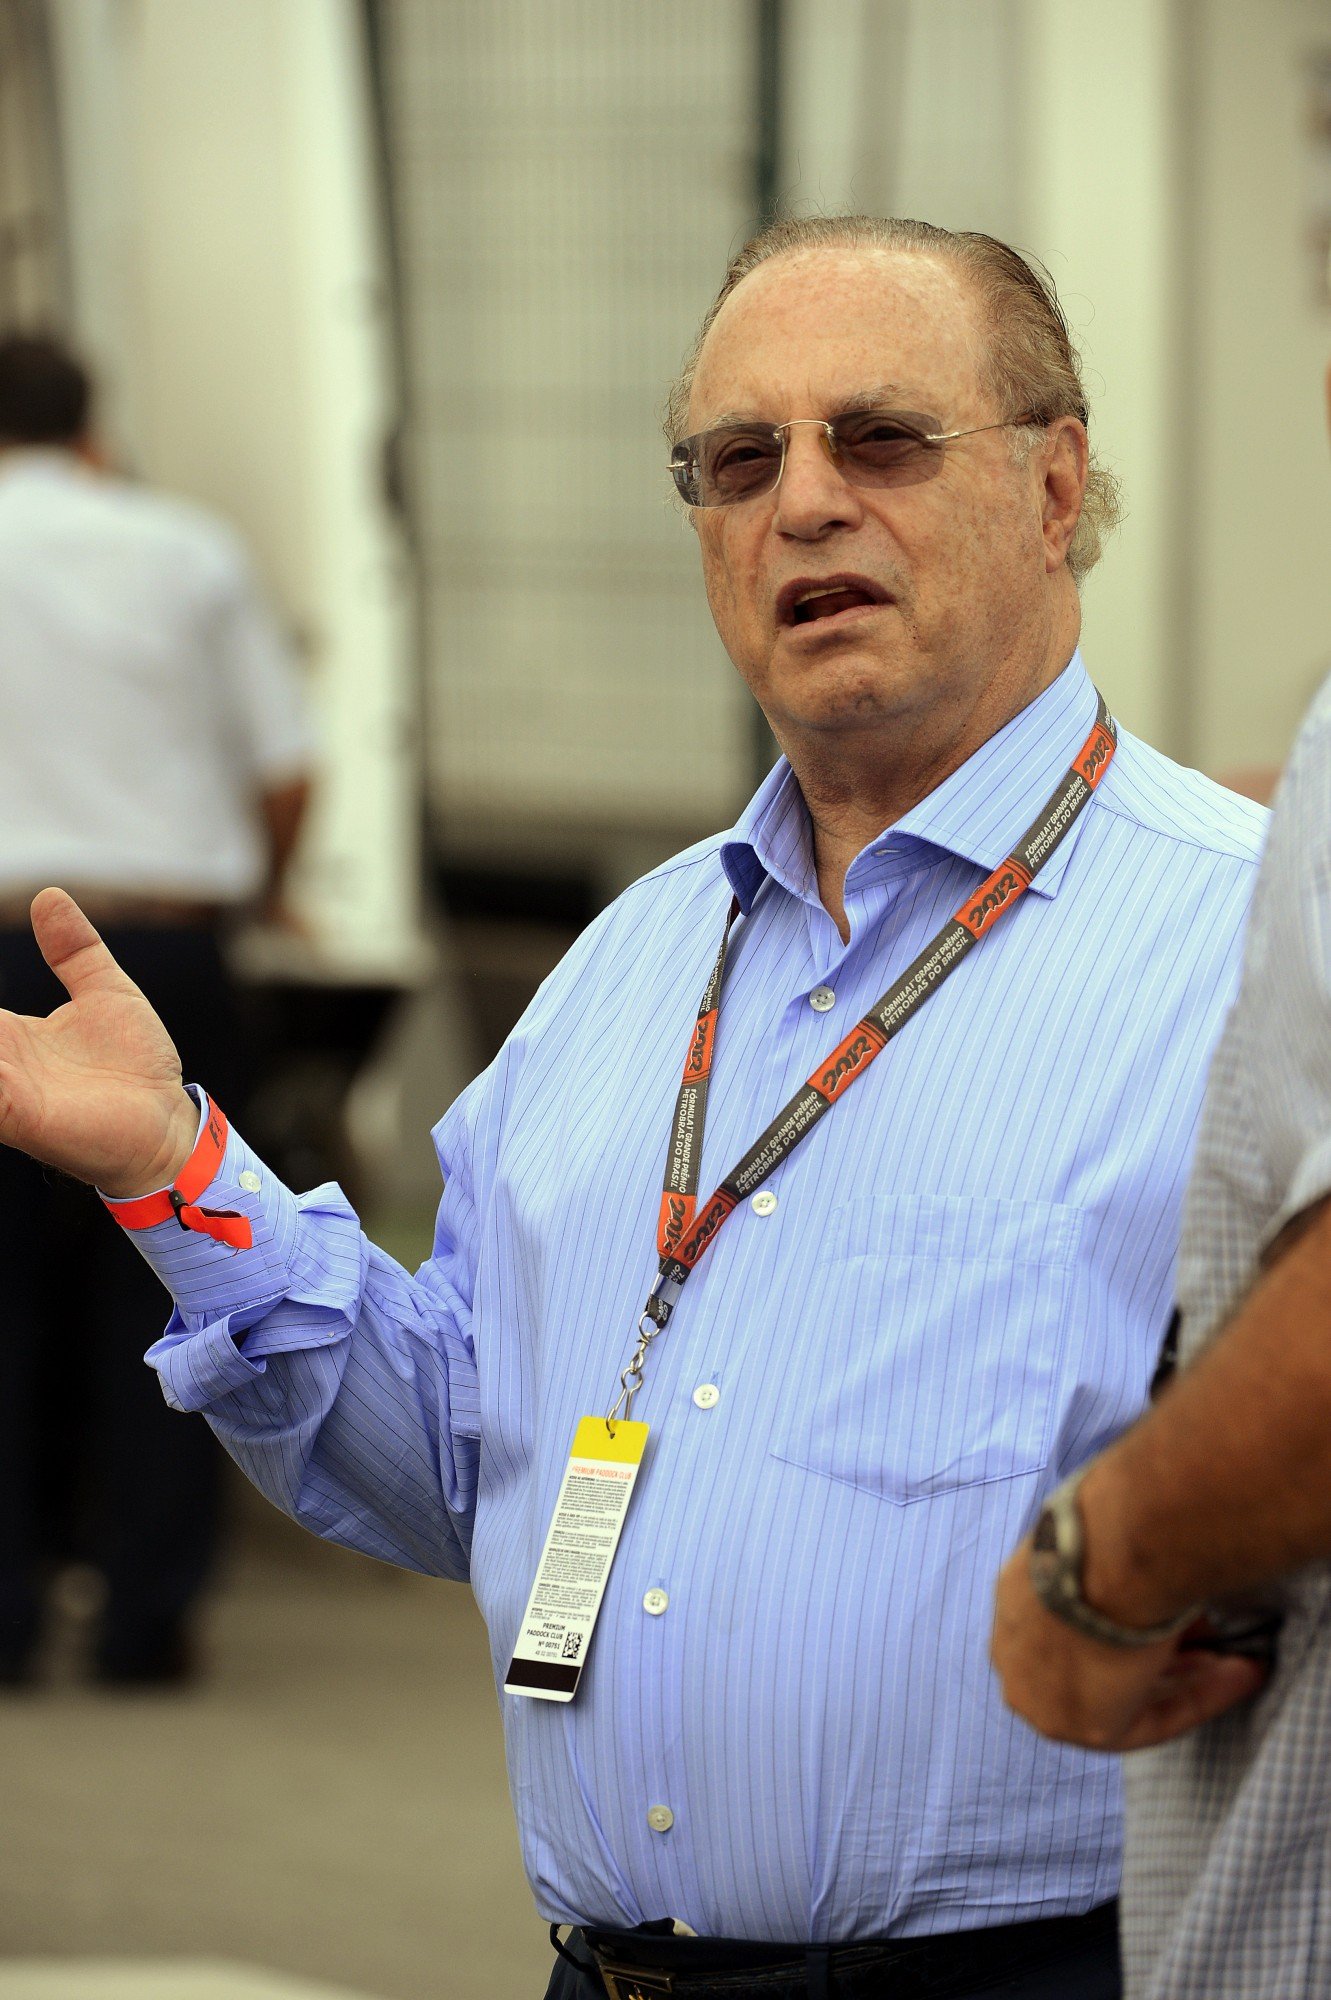 Brazilian politician Paulo Maluf is seen at the Interlagos race track during the free practices on November 24, 2012 in Sao Paulo, Brazil. AFP PHOTO/YASUYOSHI CHIBA (Photo credit should read YASUYOSHI CHIBA/AFP/Getty Images)